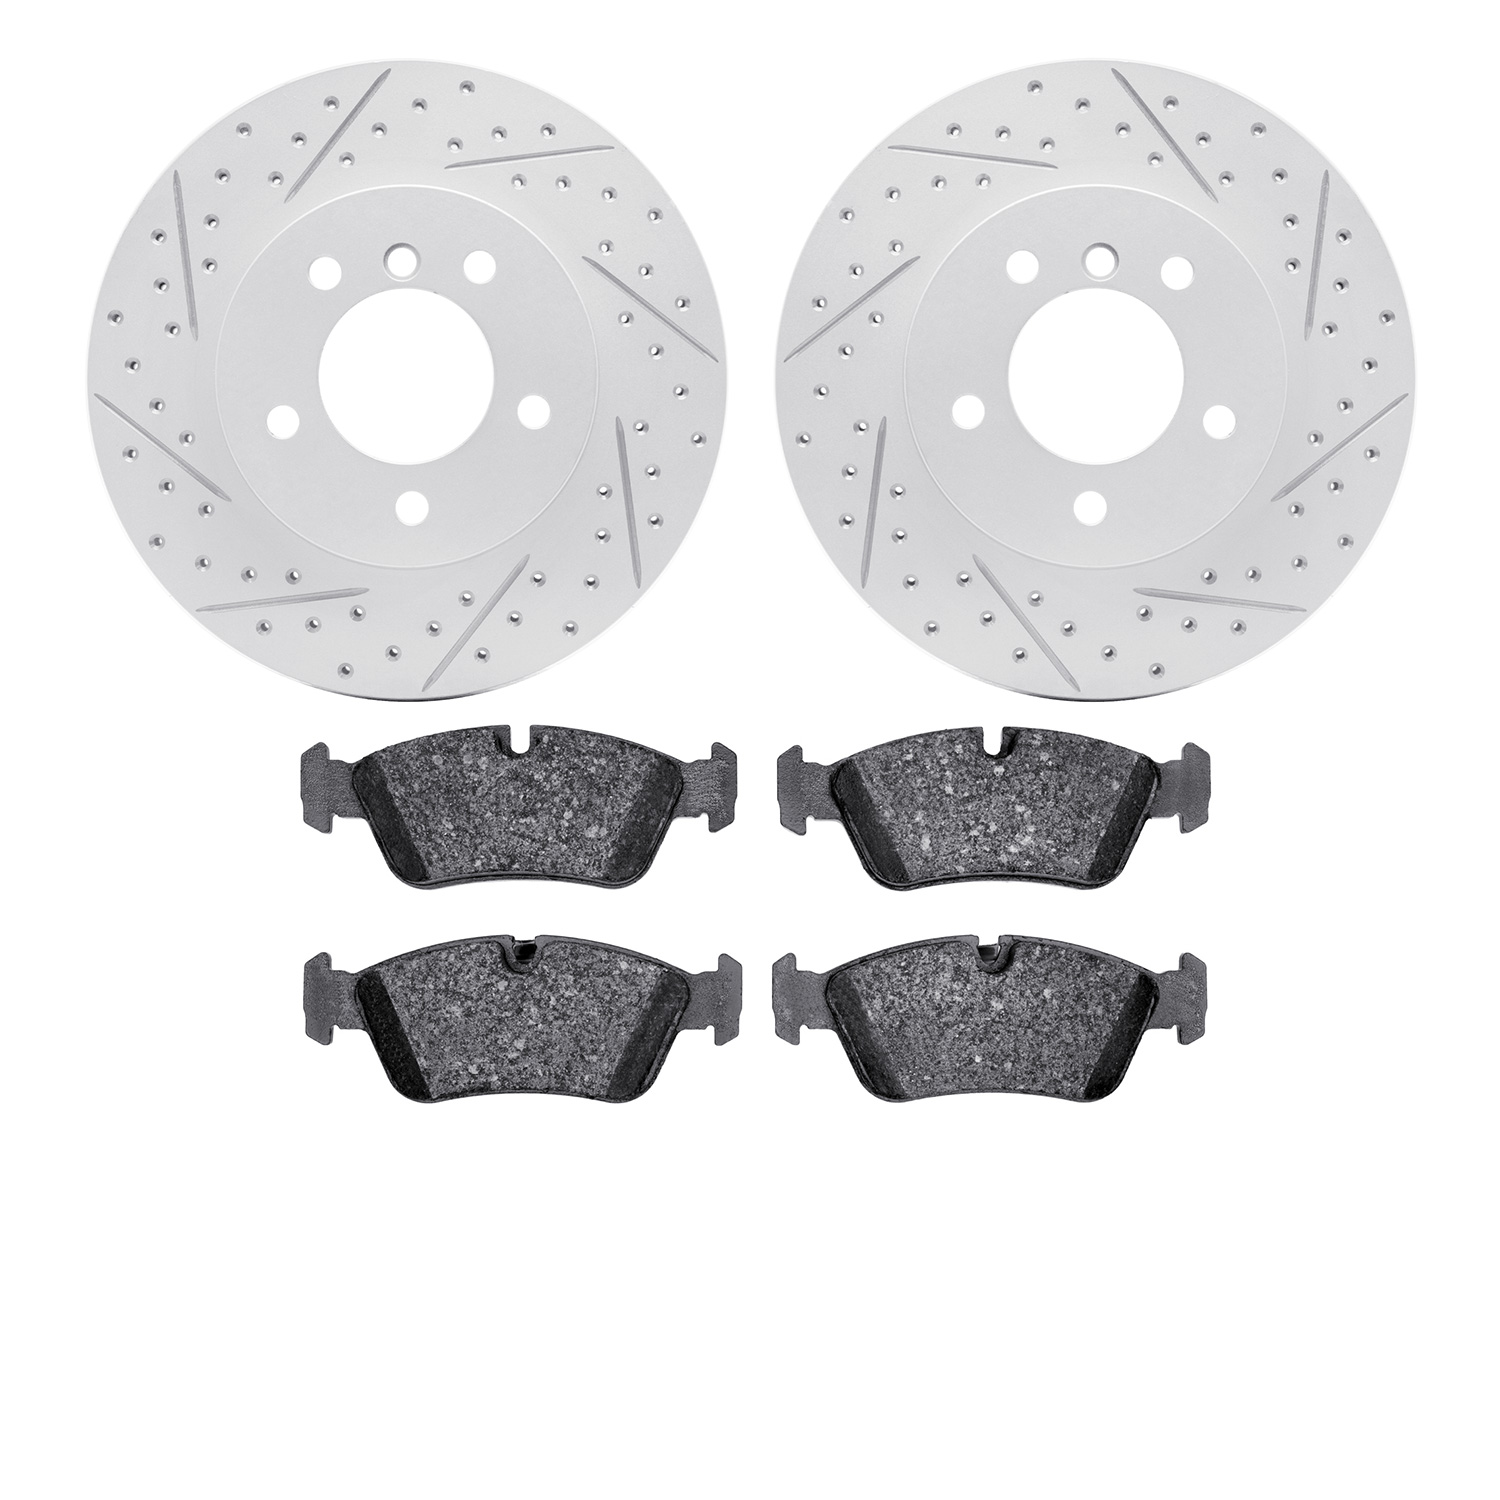 2502-31025 Geoperformance Drilled/Slotted Rotors w/5000 Advanced Brake Pads Kit, 1999-2008 BMW, Position: Front